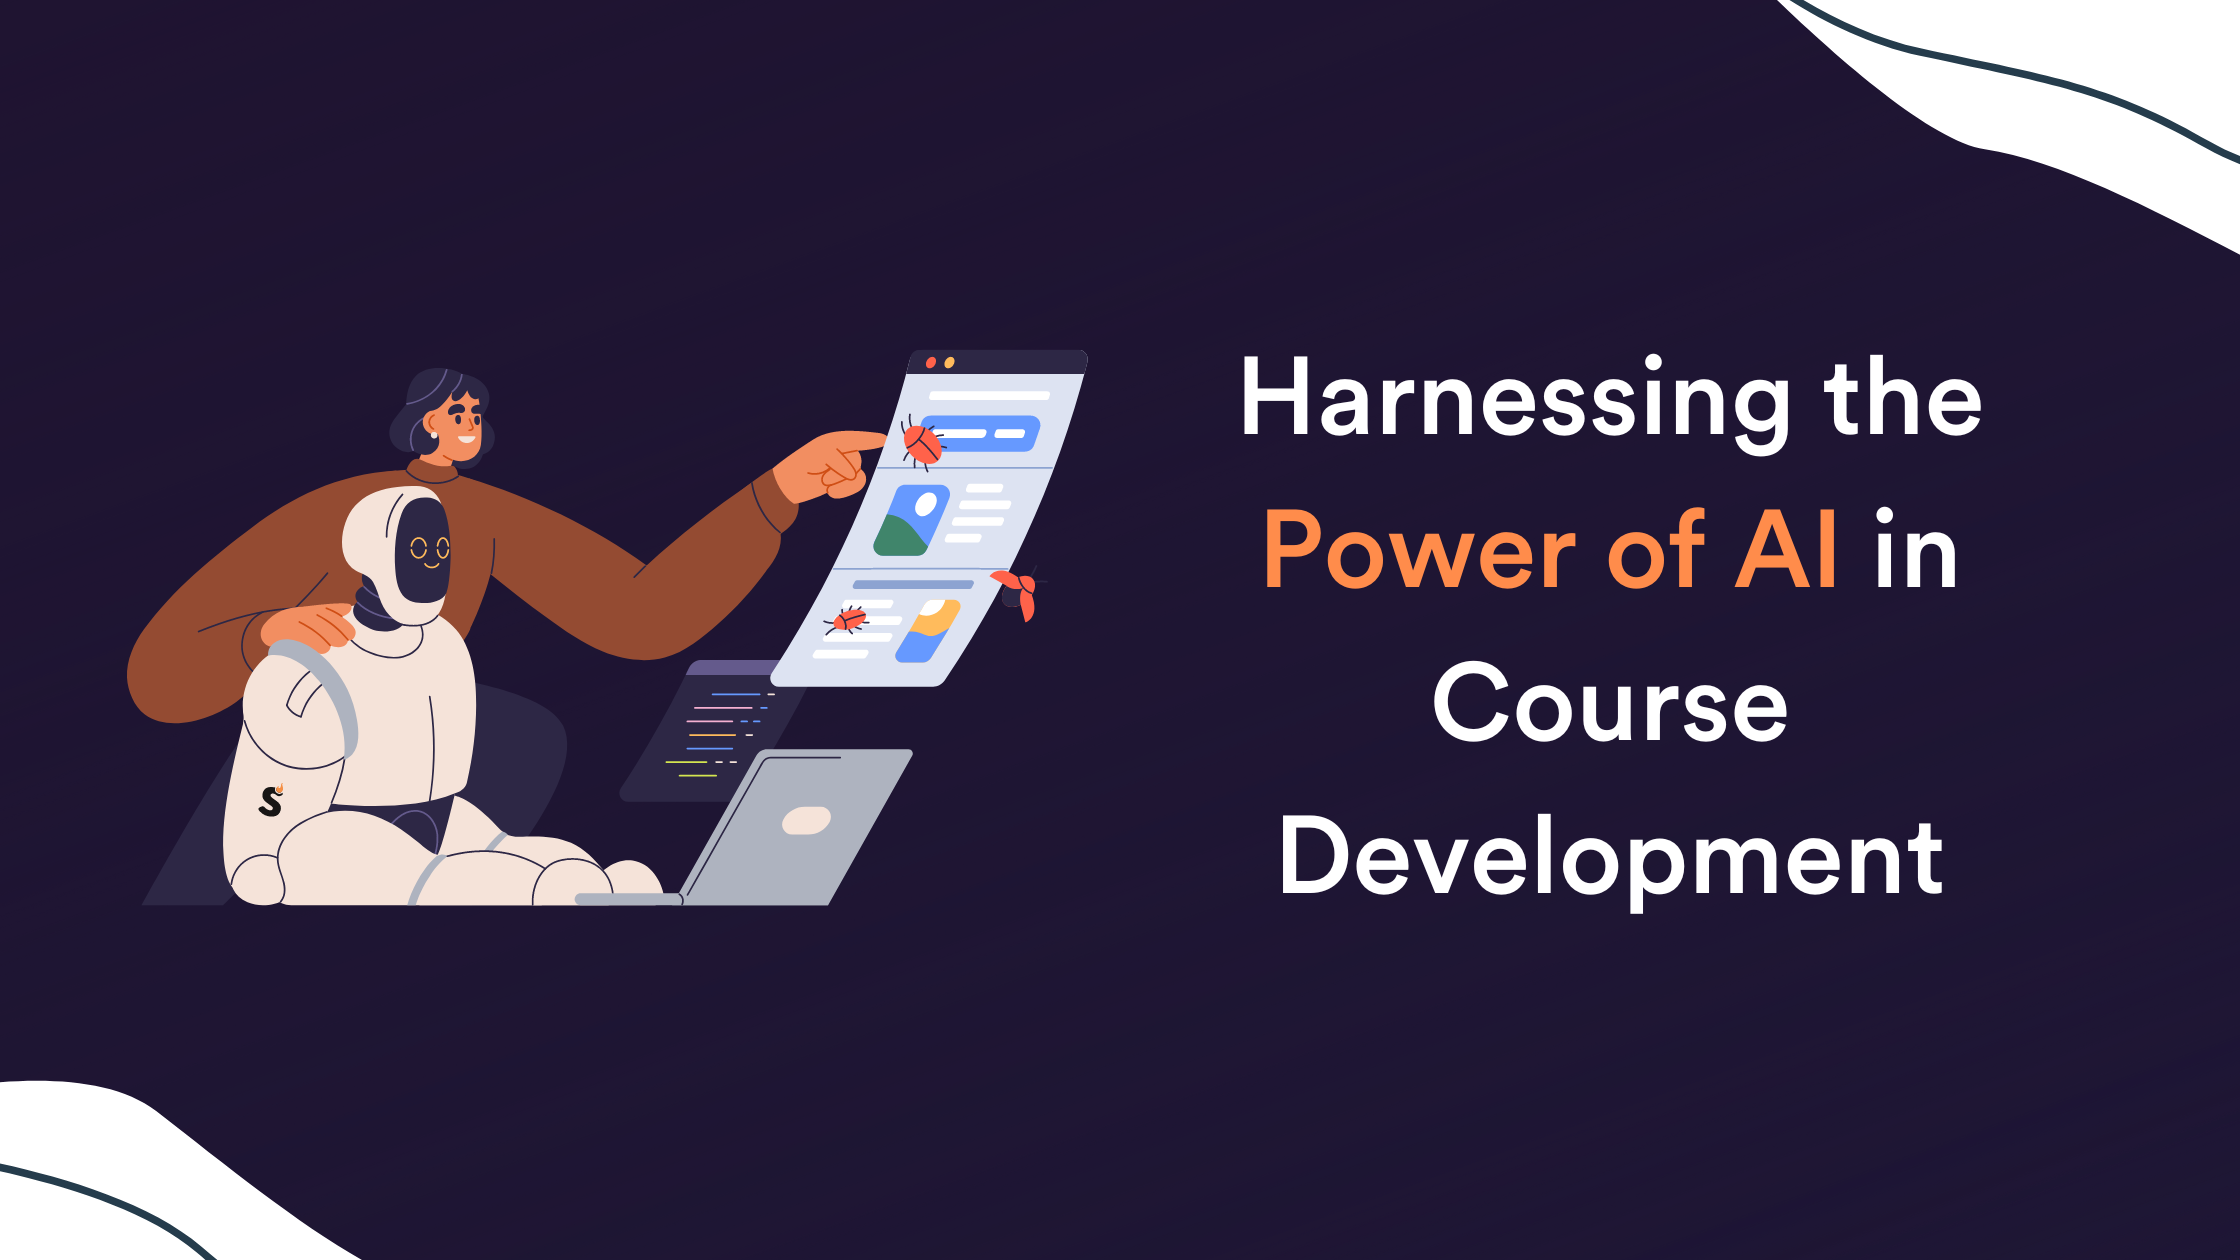 Harnessing the Power of AI in Course Development